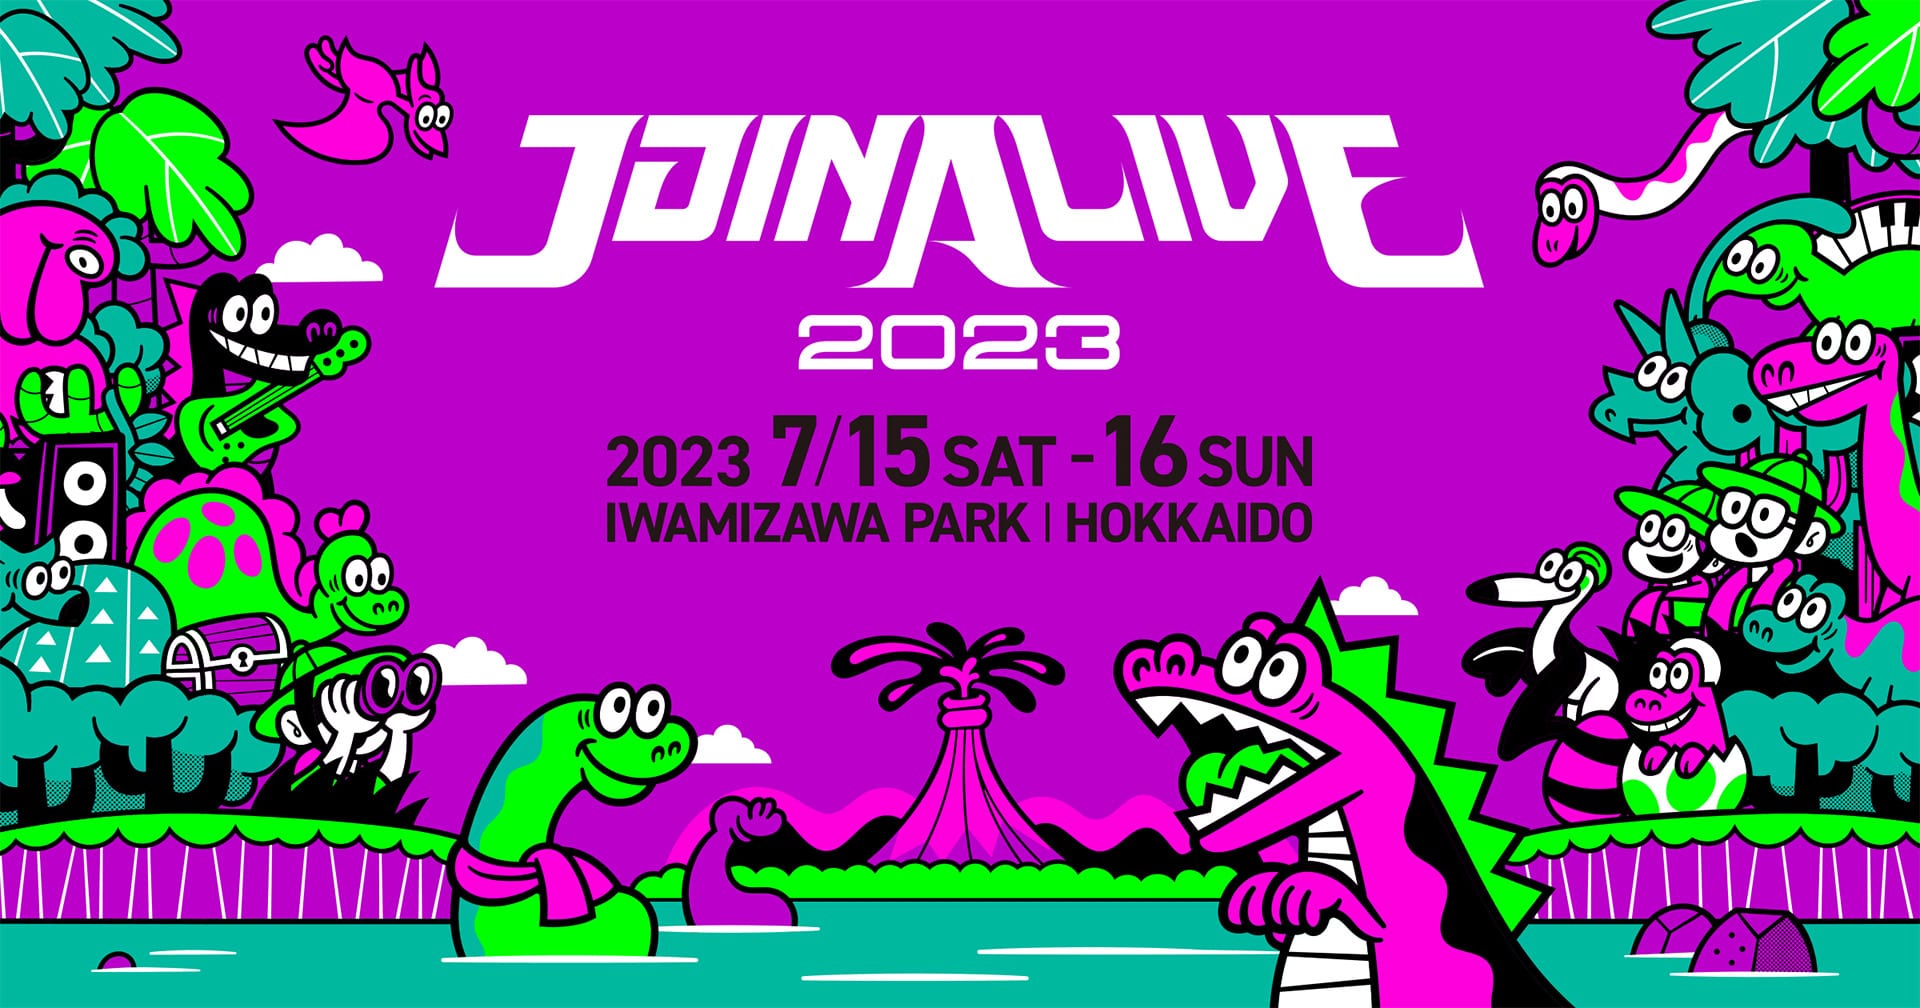 JOIN ALIVE 2023（ジョインアライブ2023）